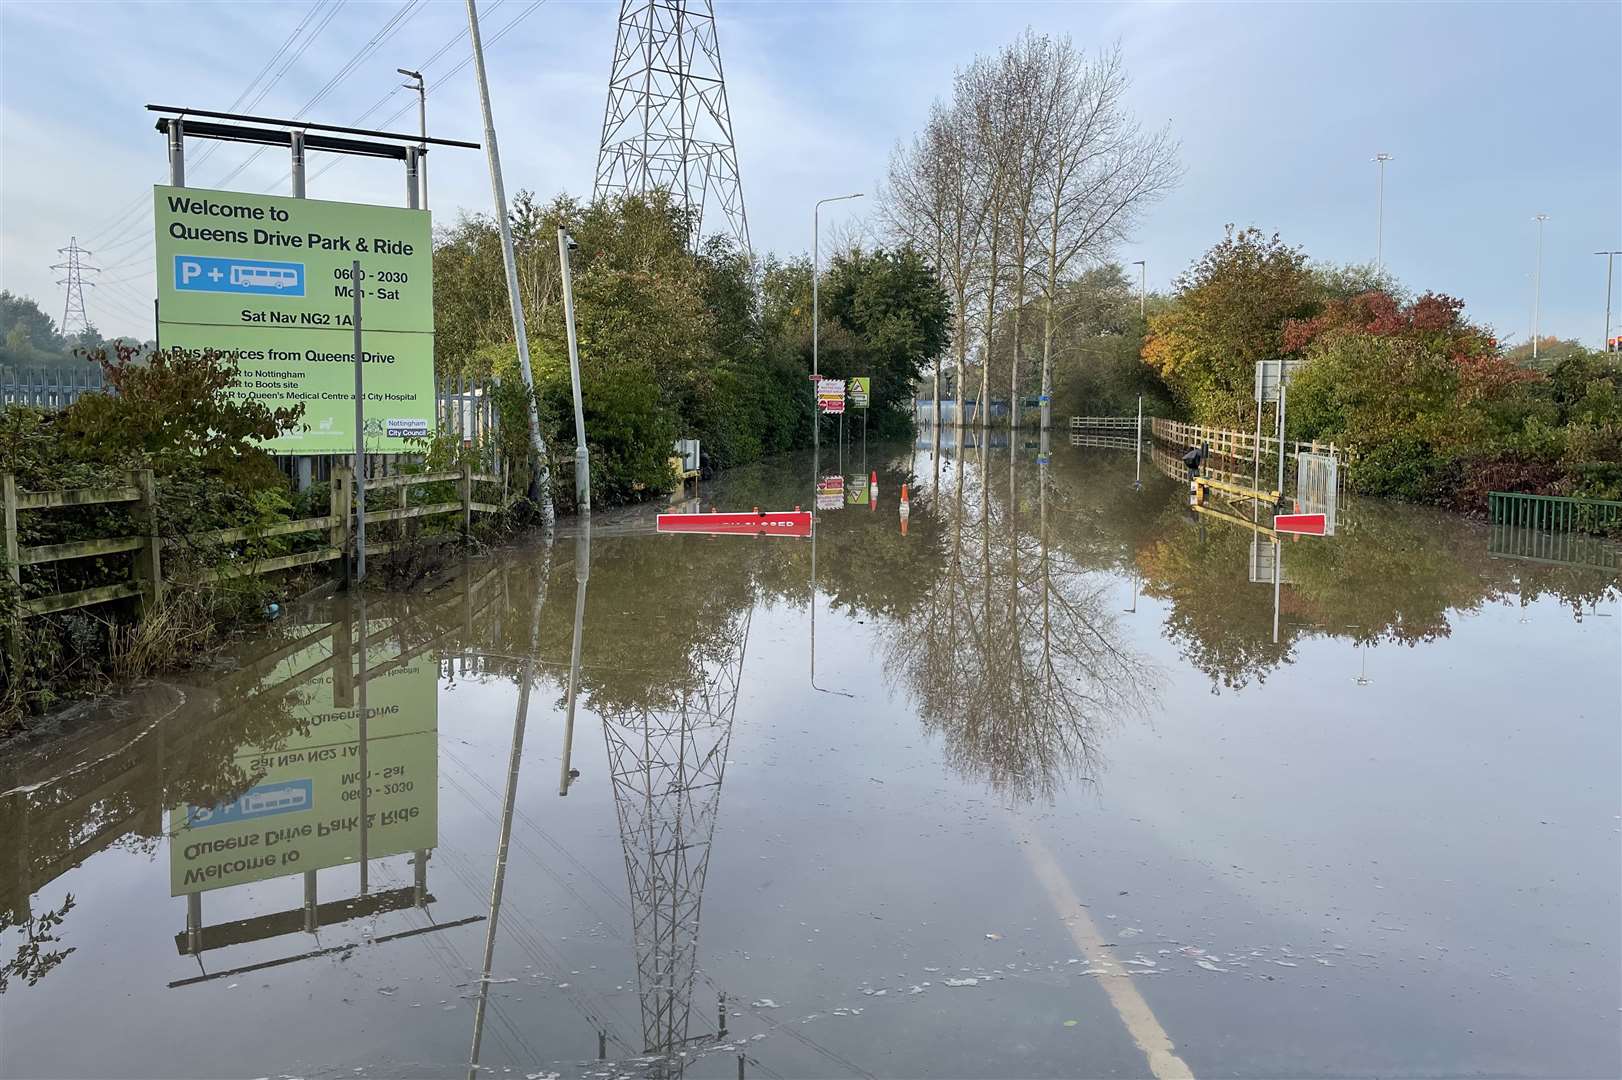 Queen’s Drive Park & Ride in Nottingham, closed due to flooding, after Storm Babet battered the UK (Callum Parke/PA)